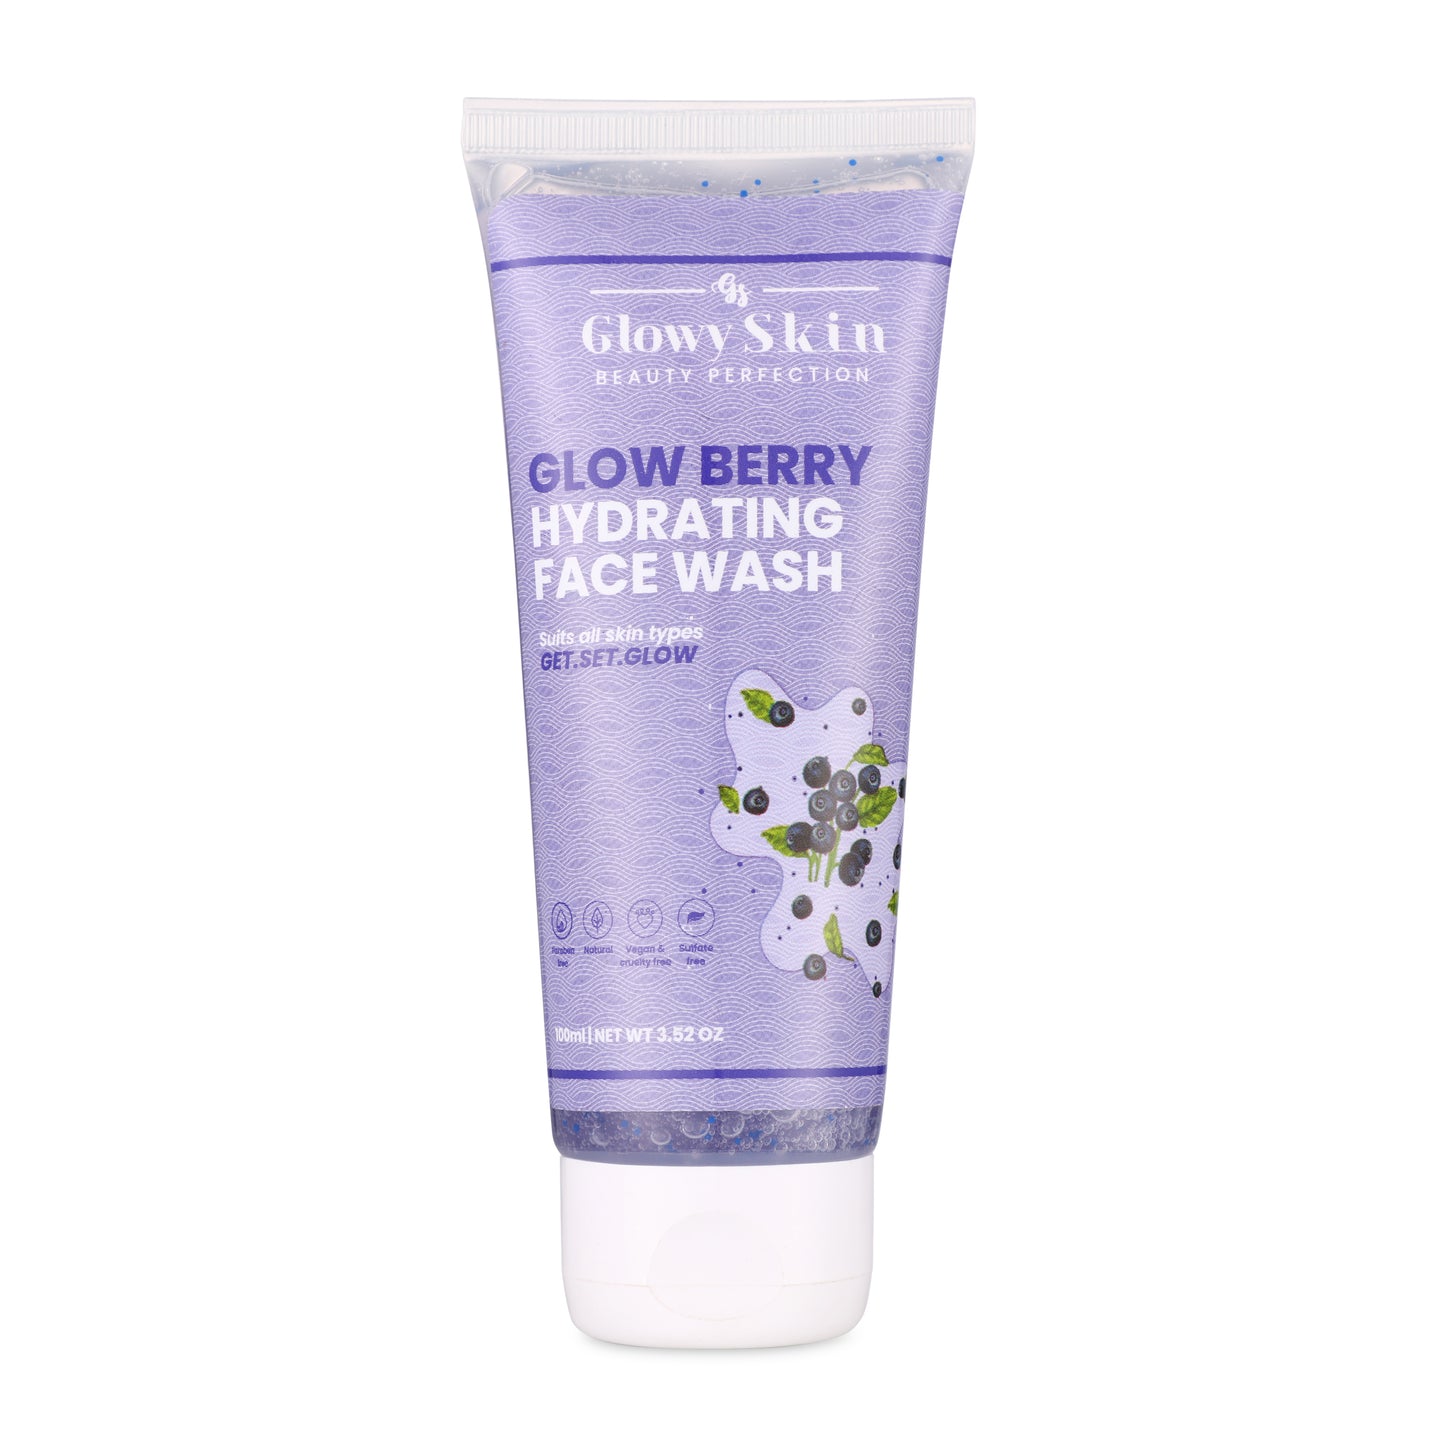 Glowberry Hydrating Face Wash